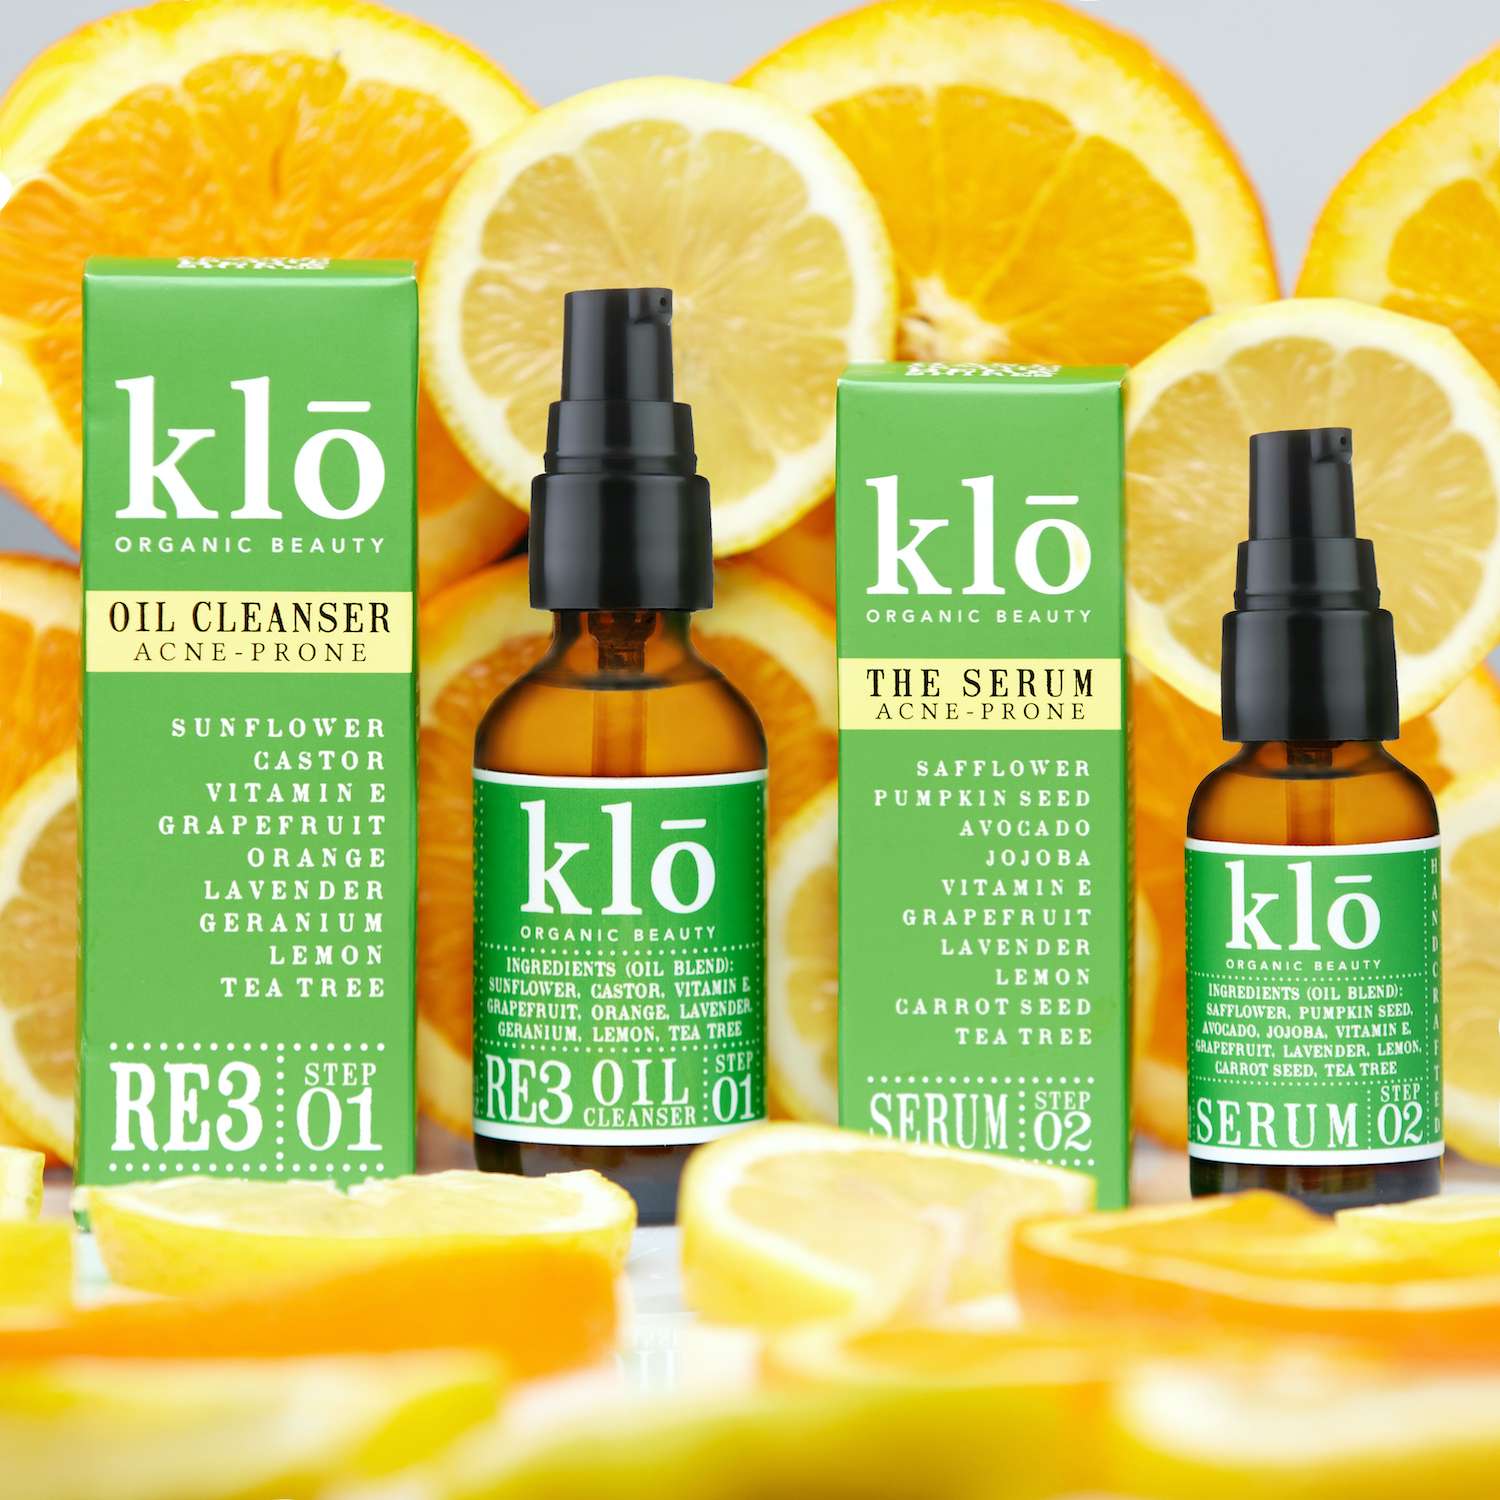 Klo Organic Beauty RE3 oil cleanser and serum for acne-prone skin duo with cut up citrus.